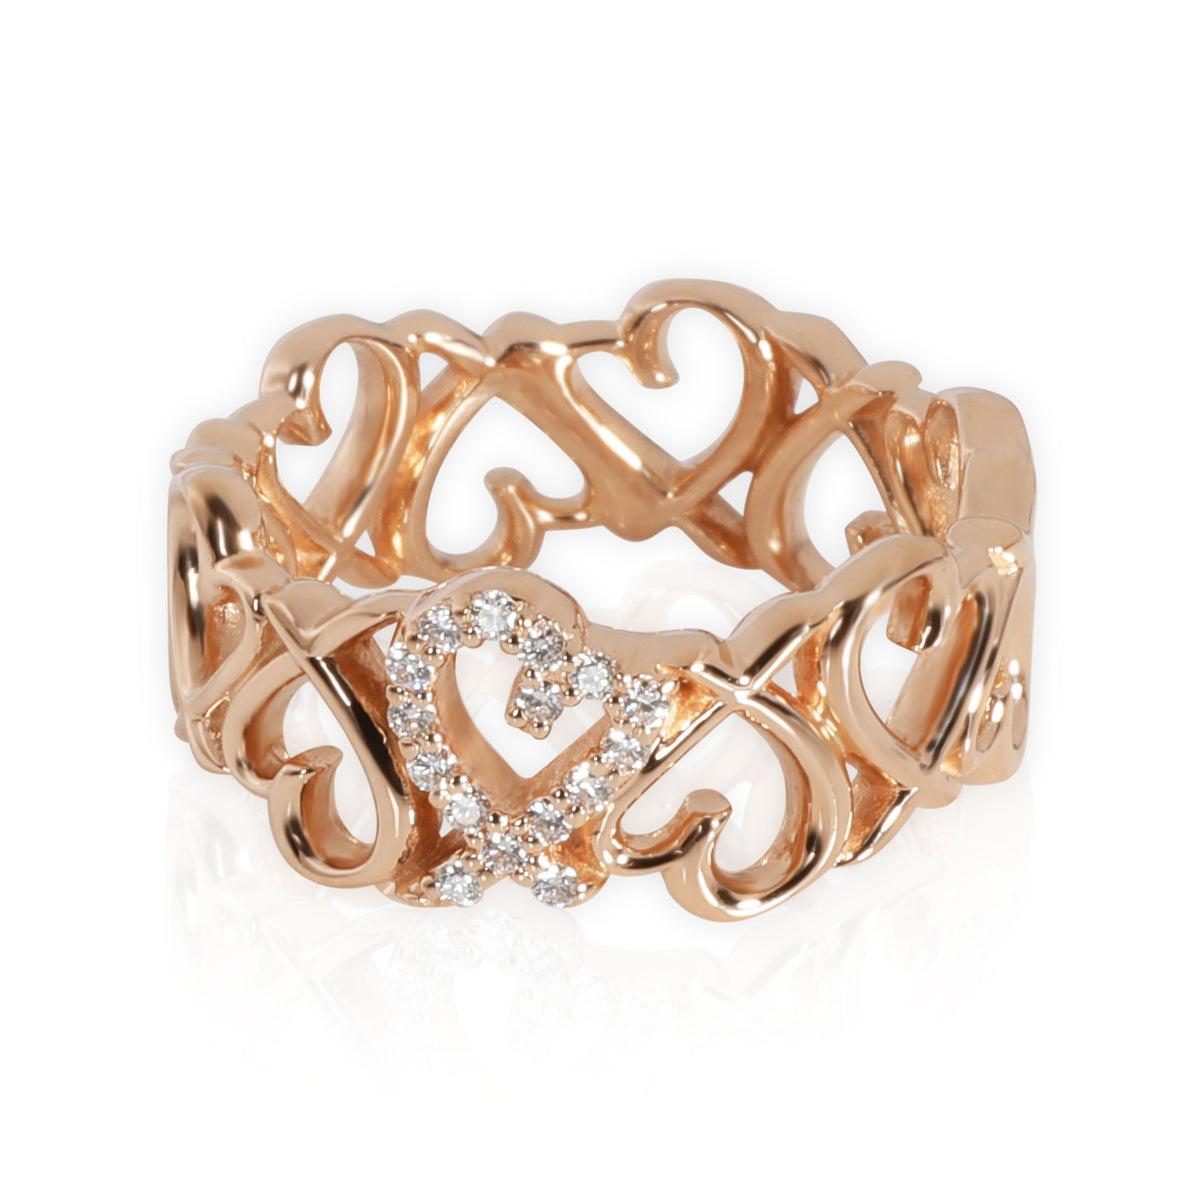 Tiffany & Co. Paloma Picasso Loving Heart Diamond Ring in 18K Rose Gold 0.05 CTW